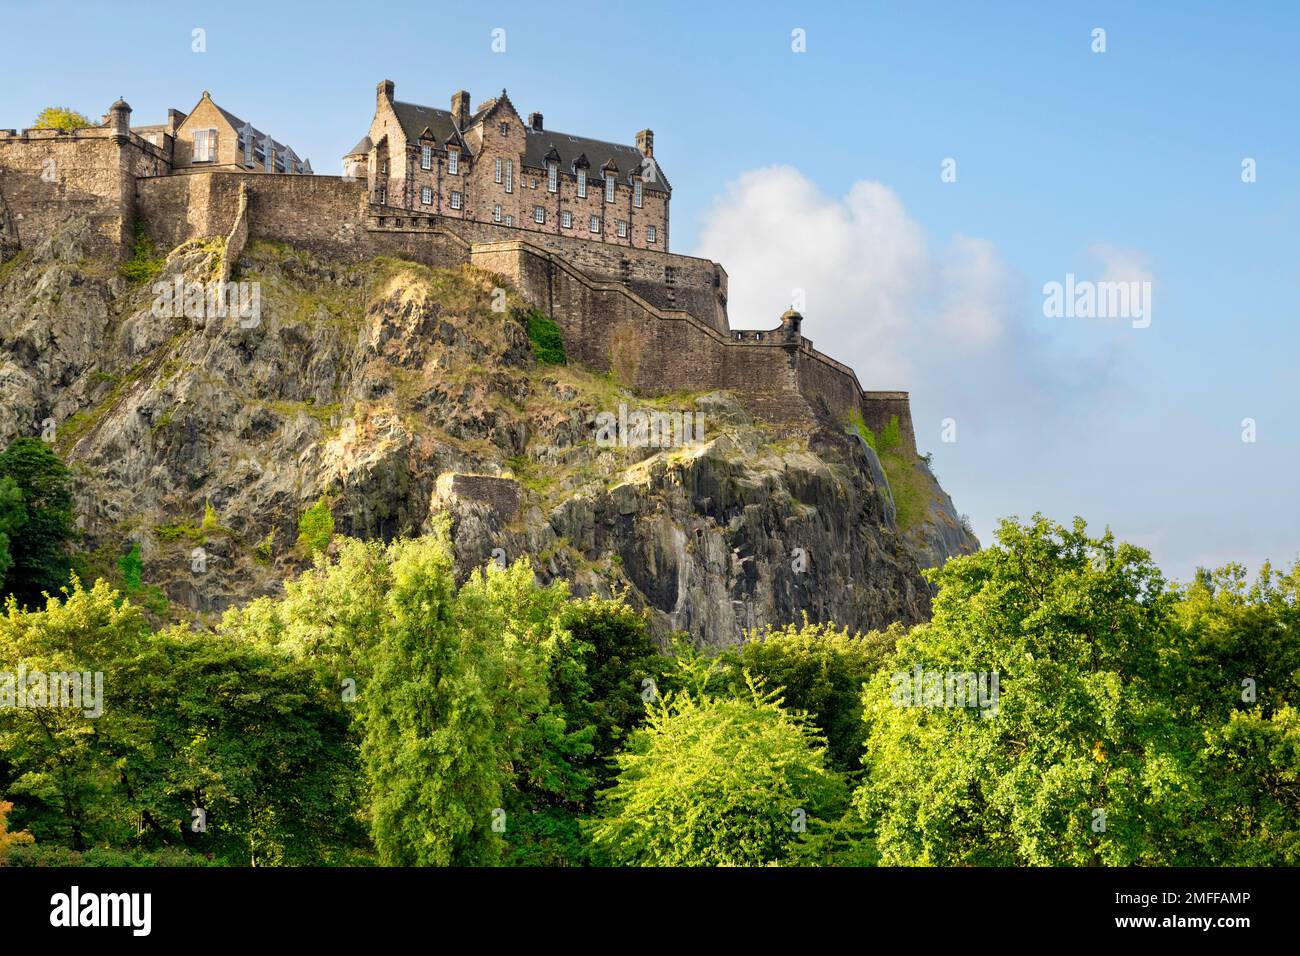 Edinburgh Castle, perched on its rock above the trees on Princes Street Gardens. Stock Photo